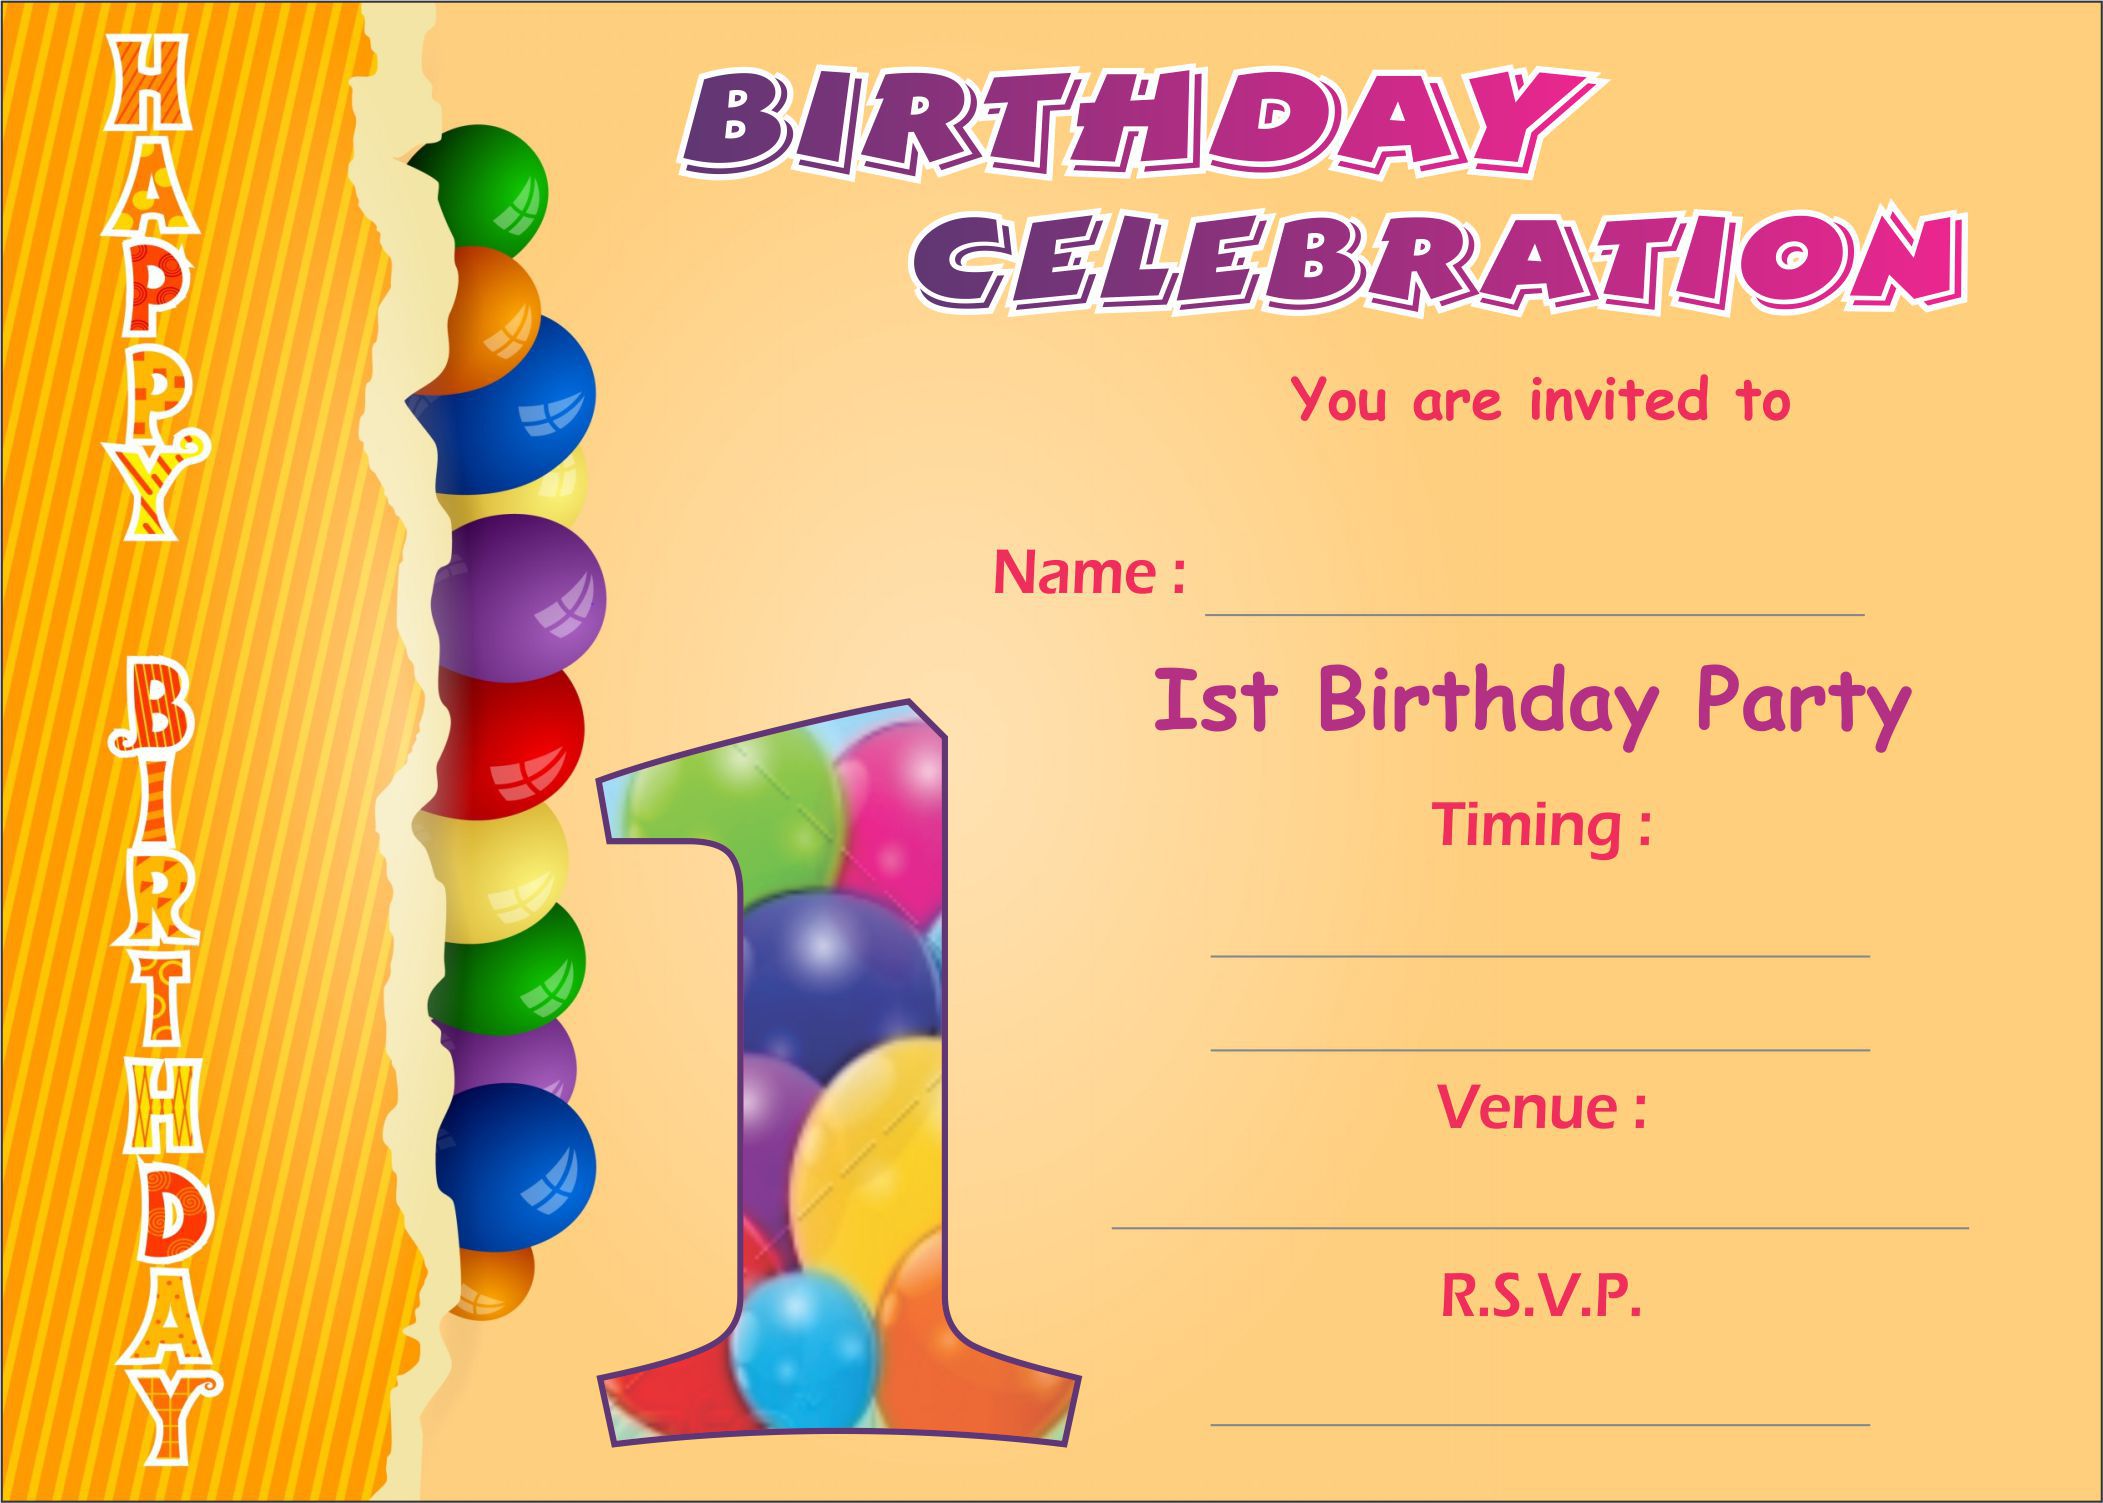 Birthday invitation Metallic cards for Boy's and Girl's (Pack of 25